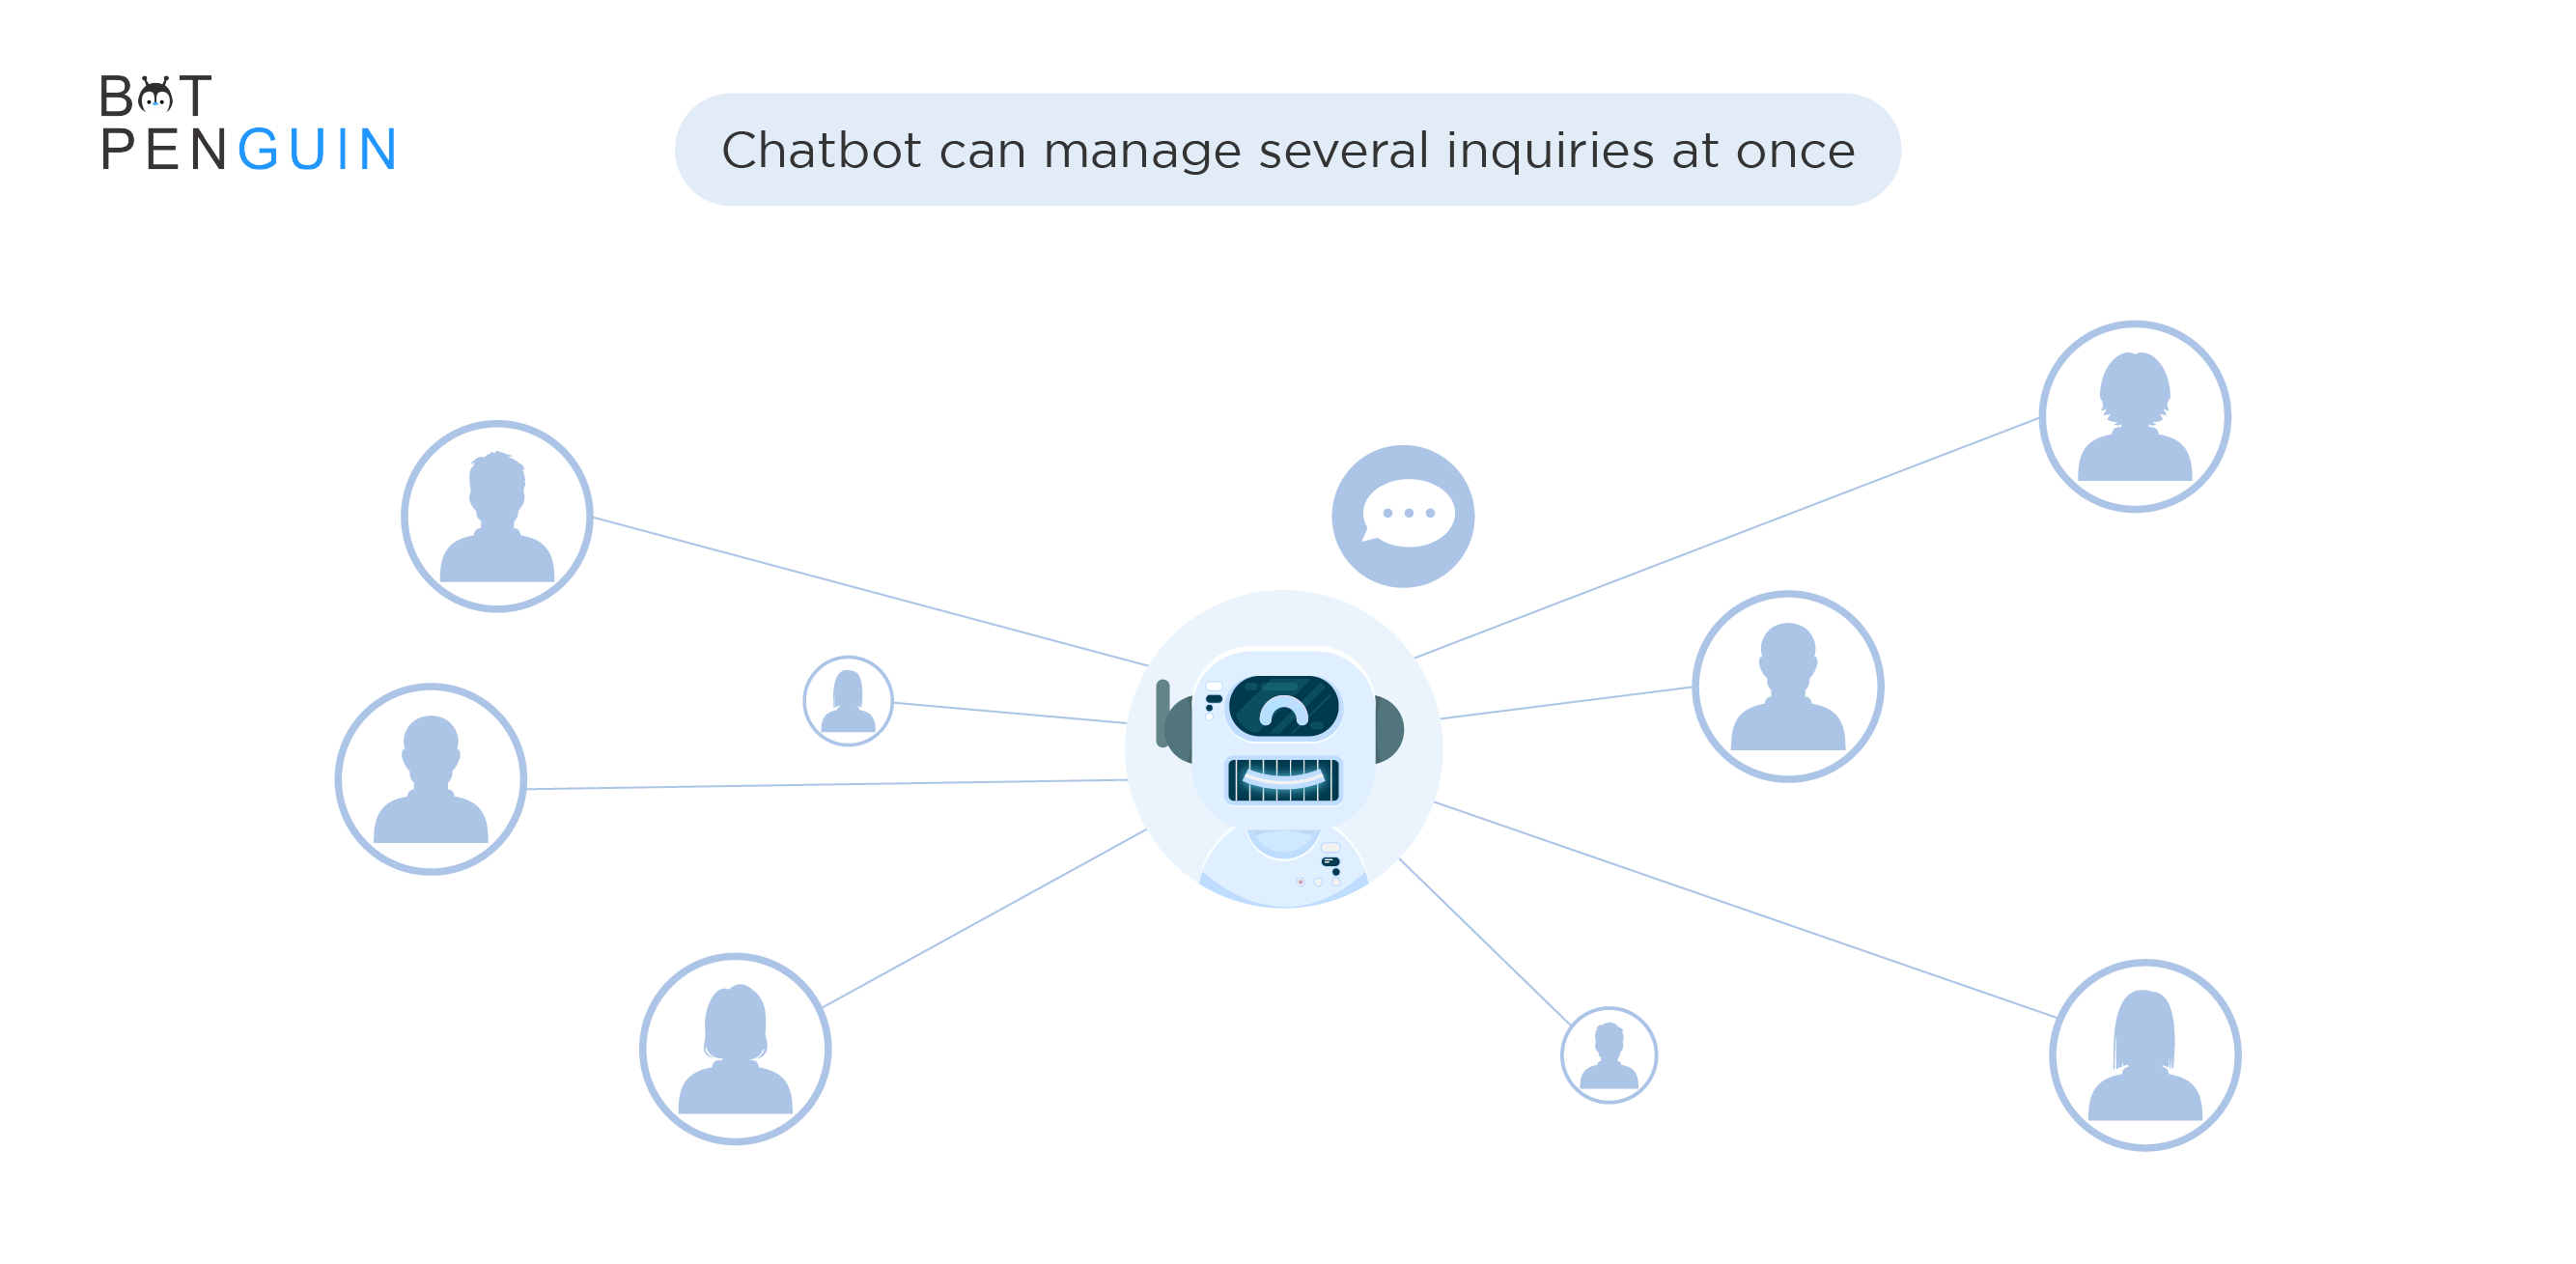 Chatbots can quickly recognize and address client issues: